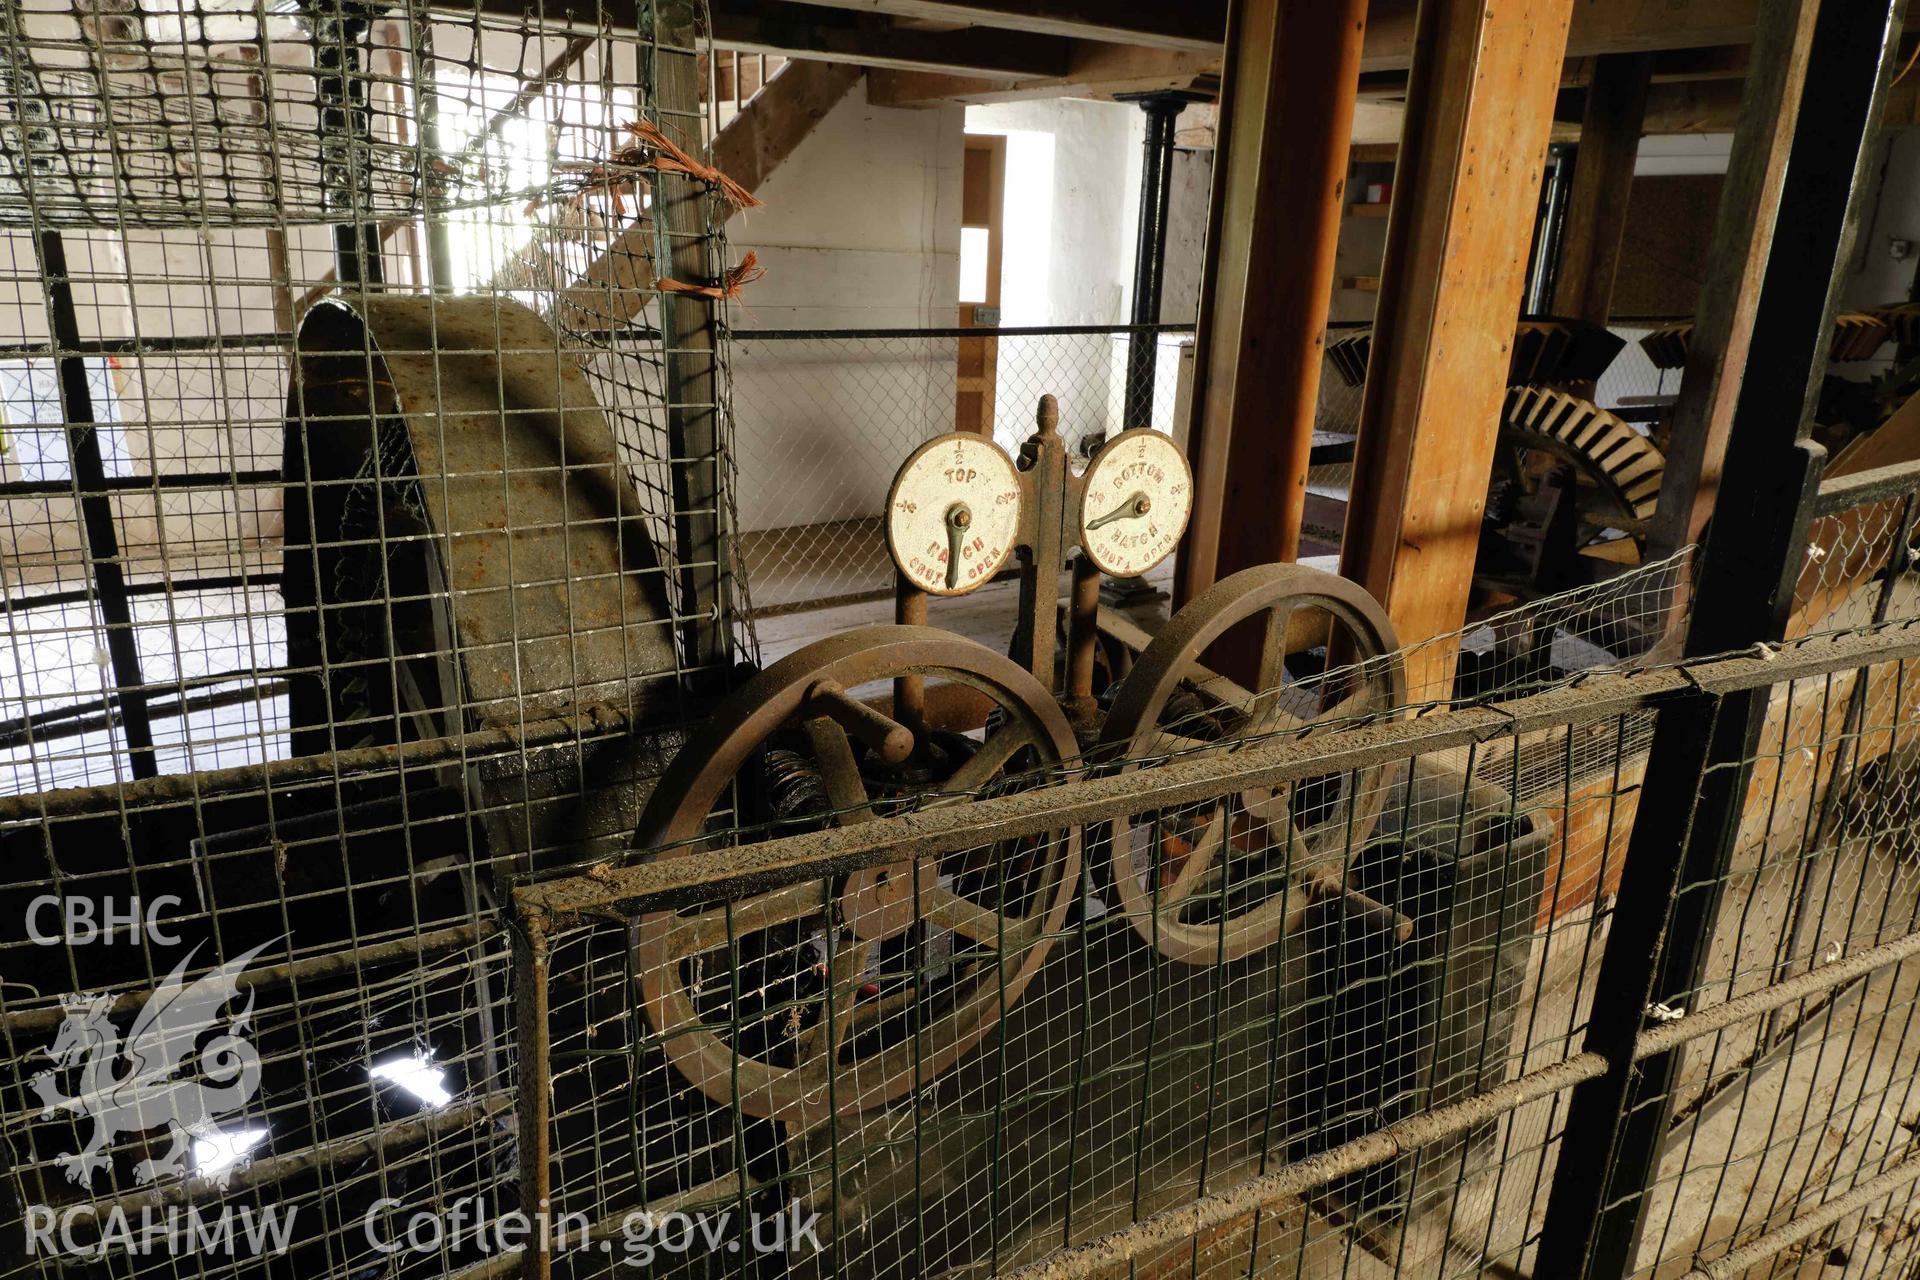 Colour photograph showing Blackpool Mill - ground floor, turbine controls, looking NE. Produced as part of Historic Building Recording for Blackpool Mill, carried out by Richard Hayman, June 2021.